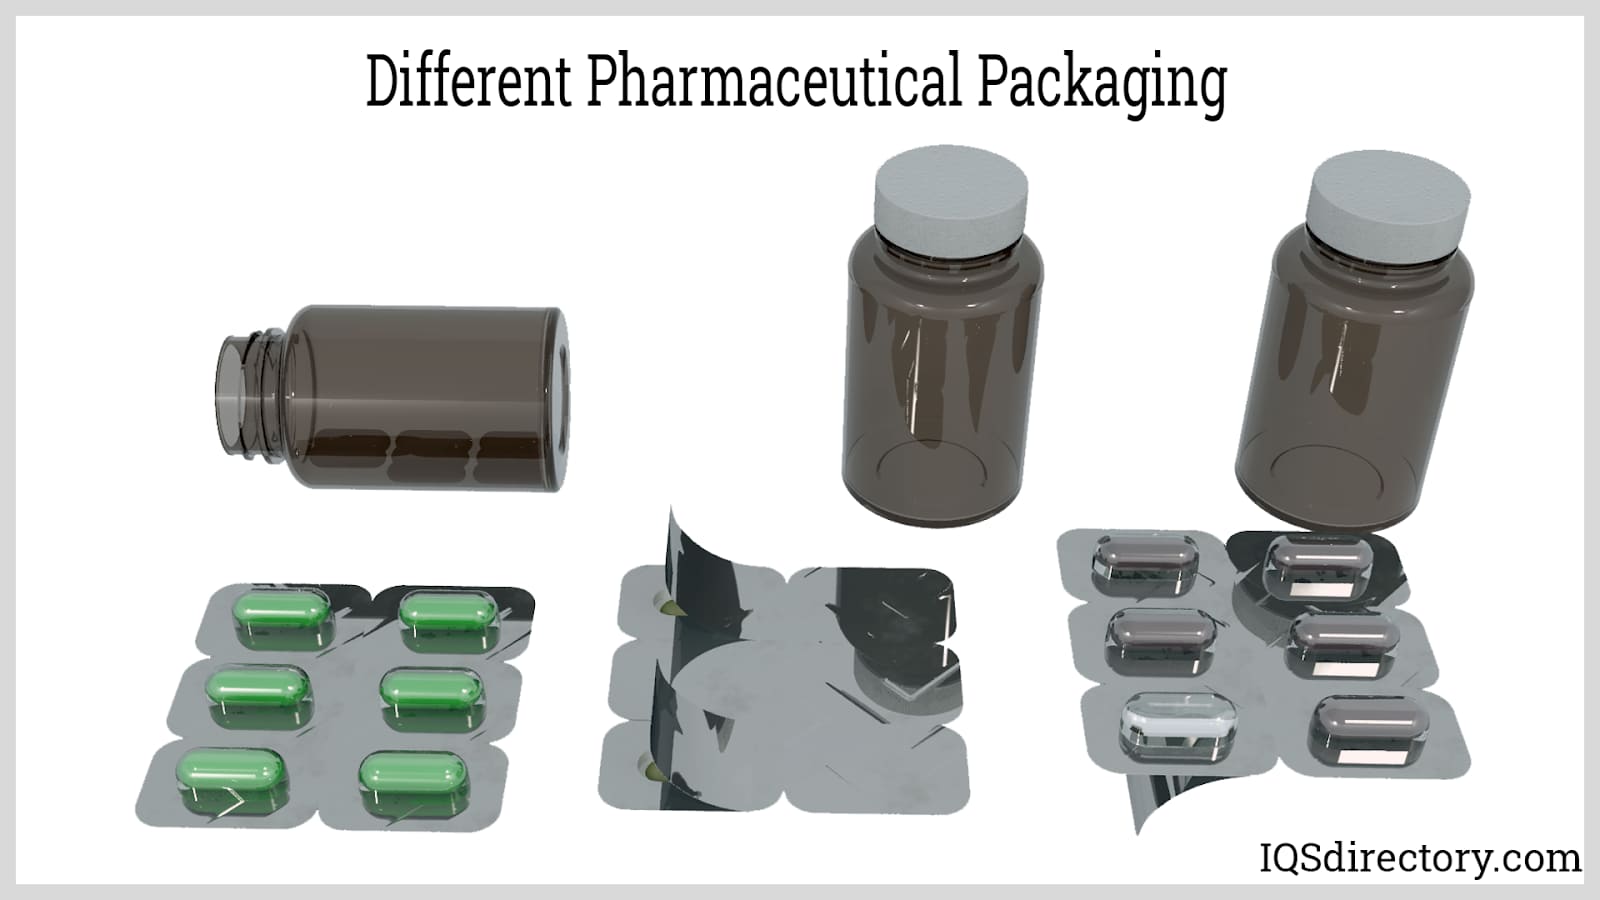 Different Pharmaceutical Packaging